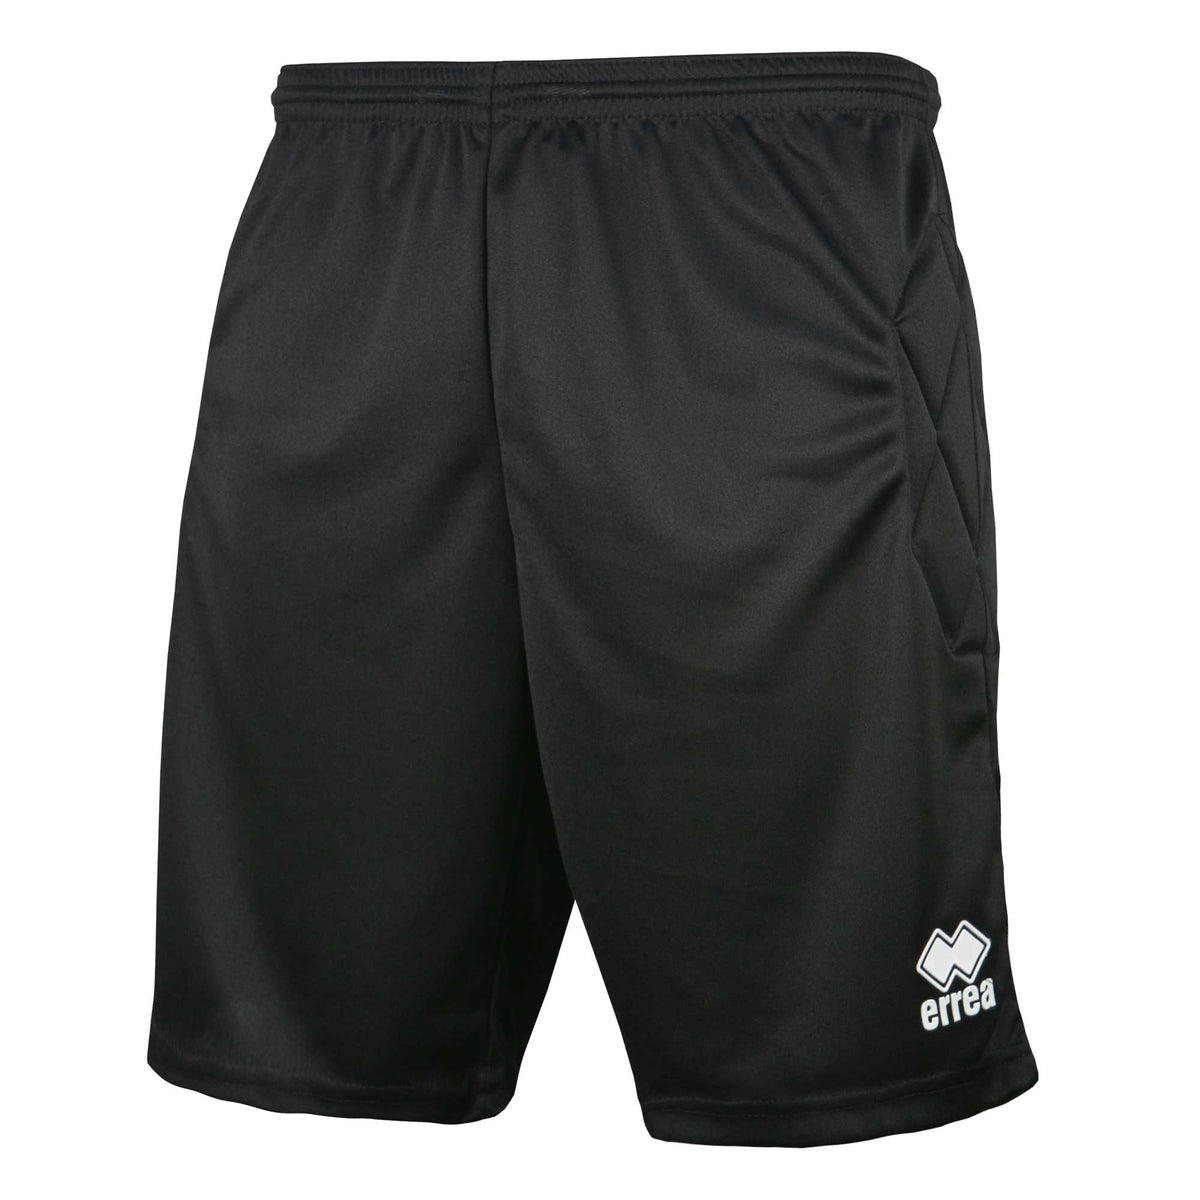 Impact Goalkeeper Shorts in Adult